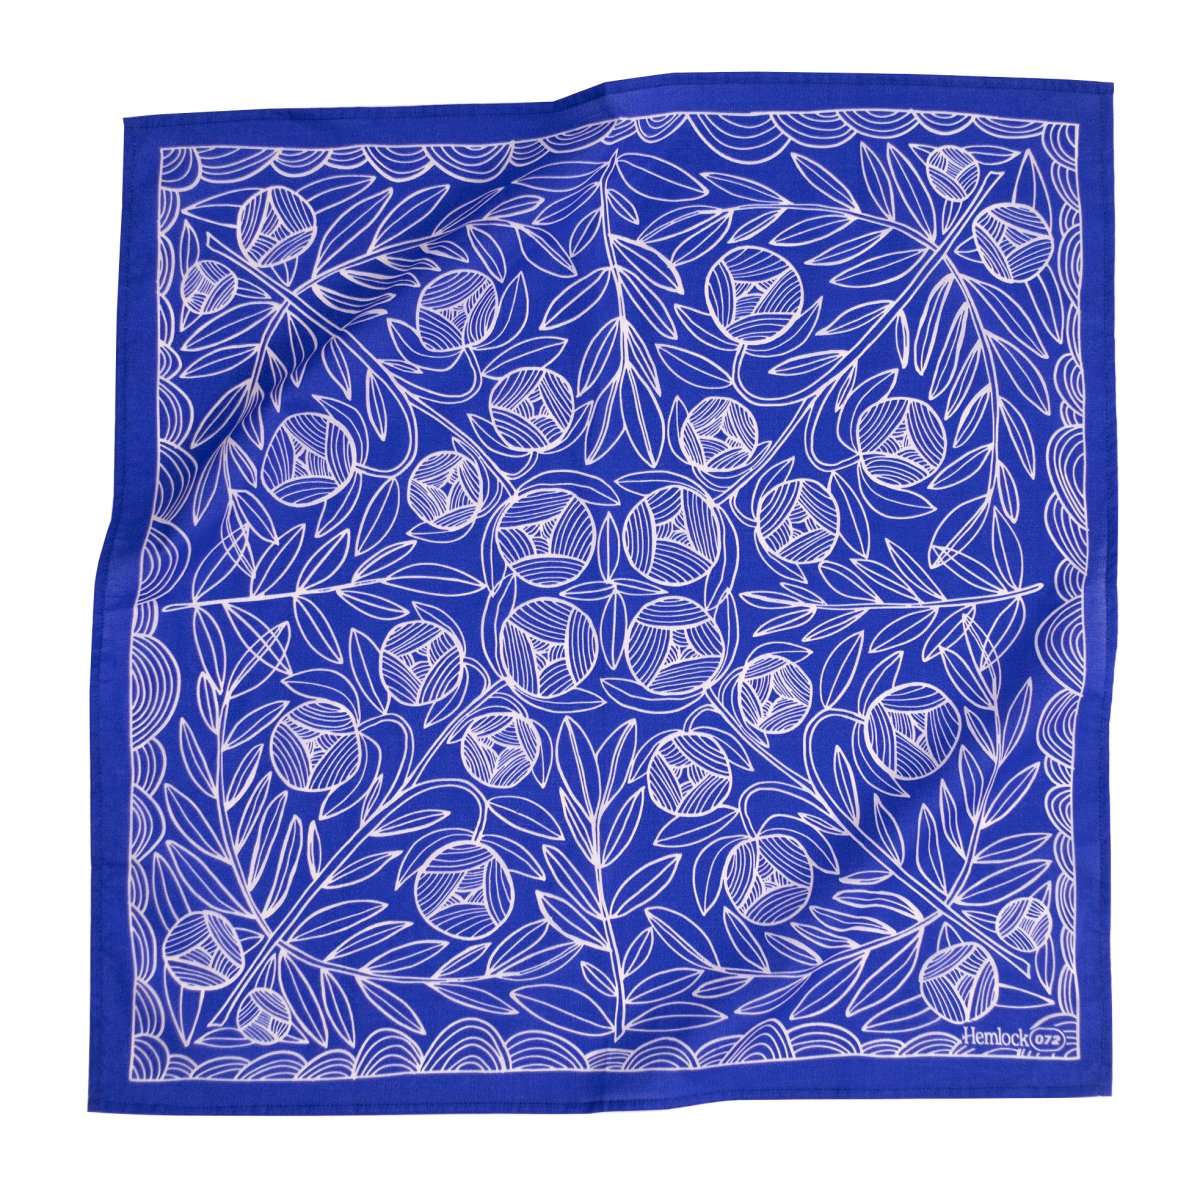 A bright blue bandana with a white floral design. Designed by Hemlock Goods in Fulton, MO and screen printed by hand in India.